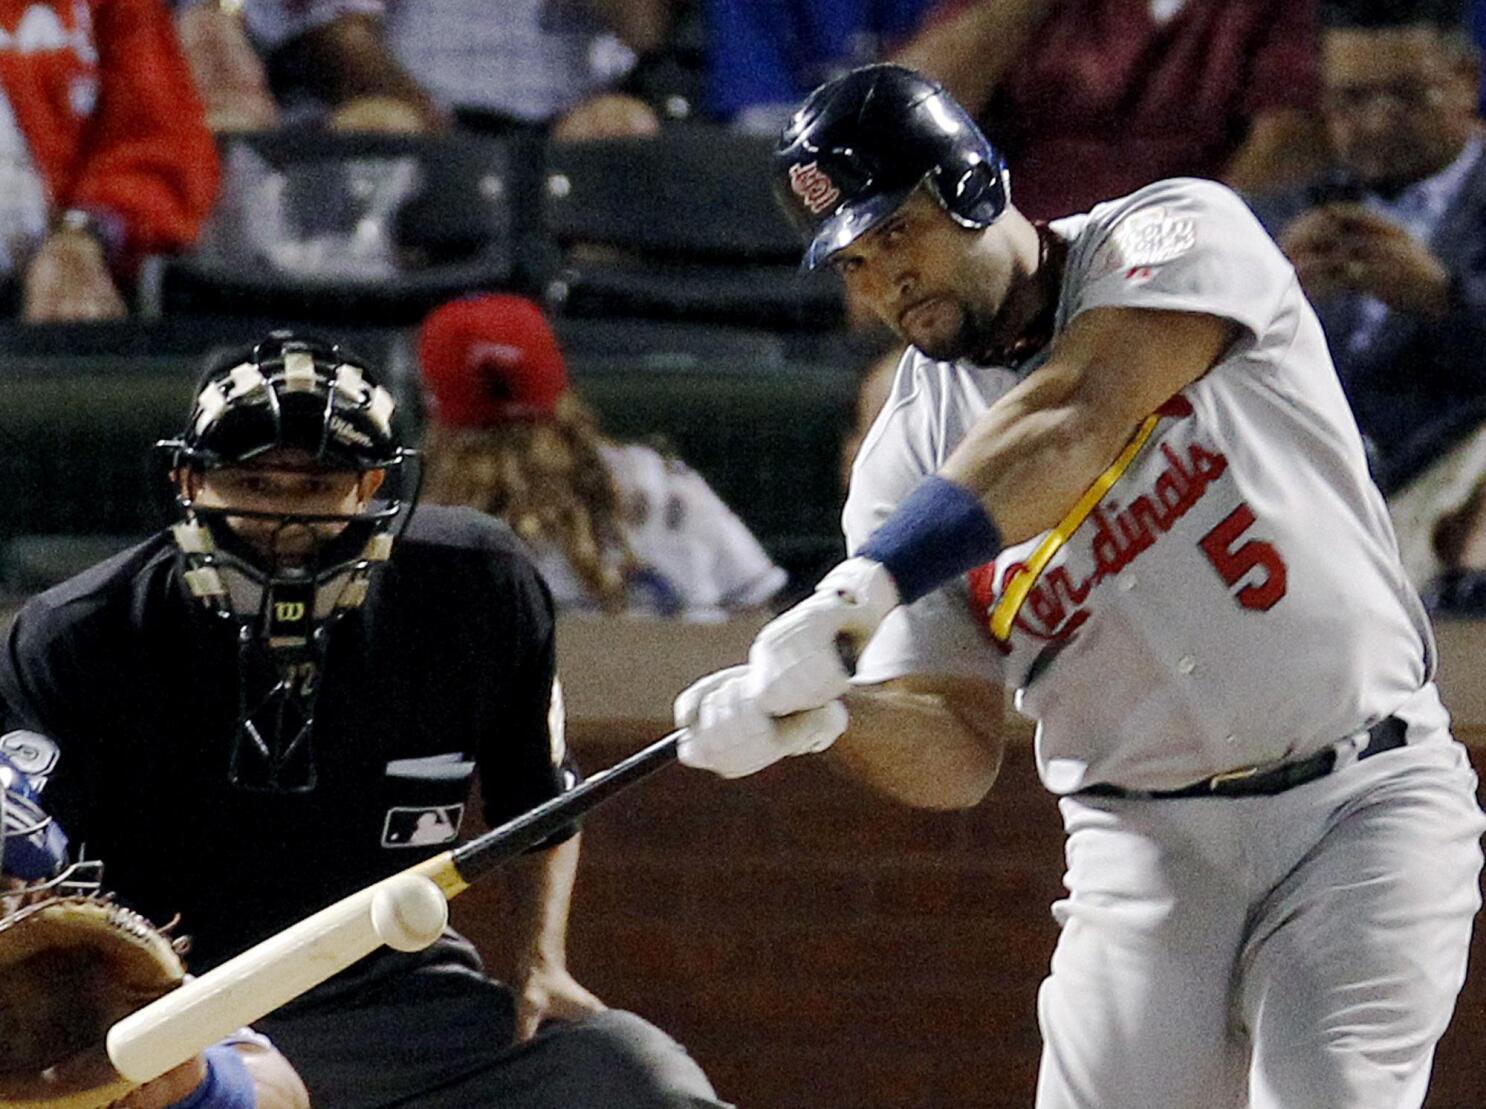 REPORTS: Albert Pujols agrees to deal with Los Angeles Dodgers